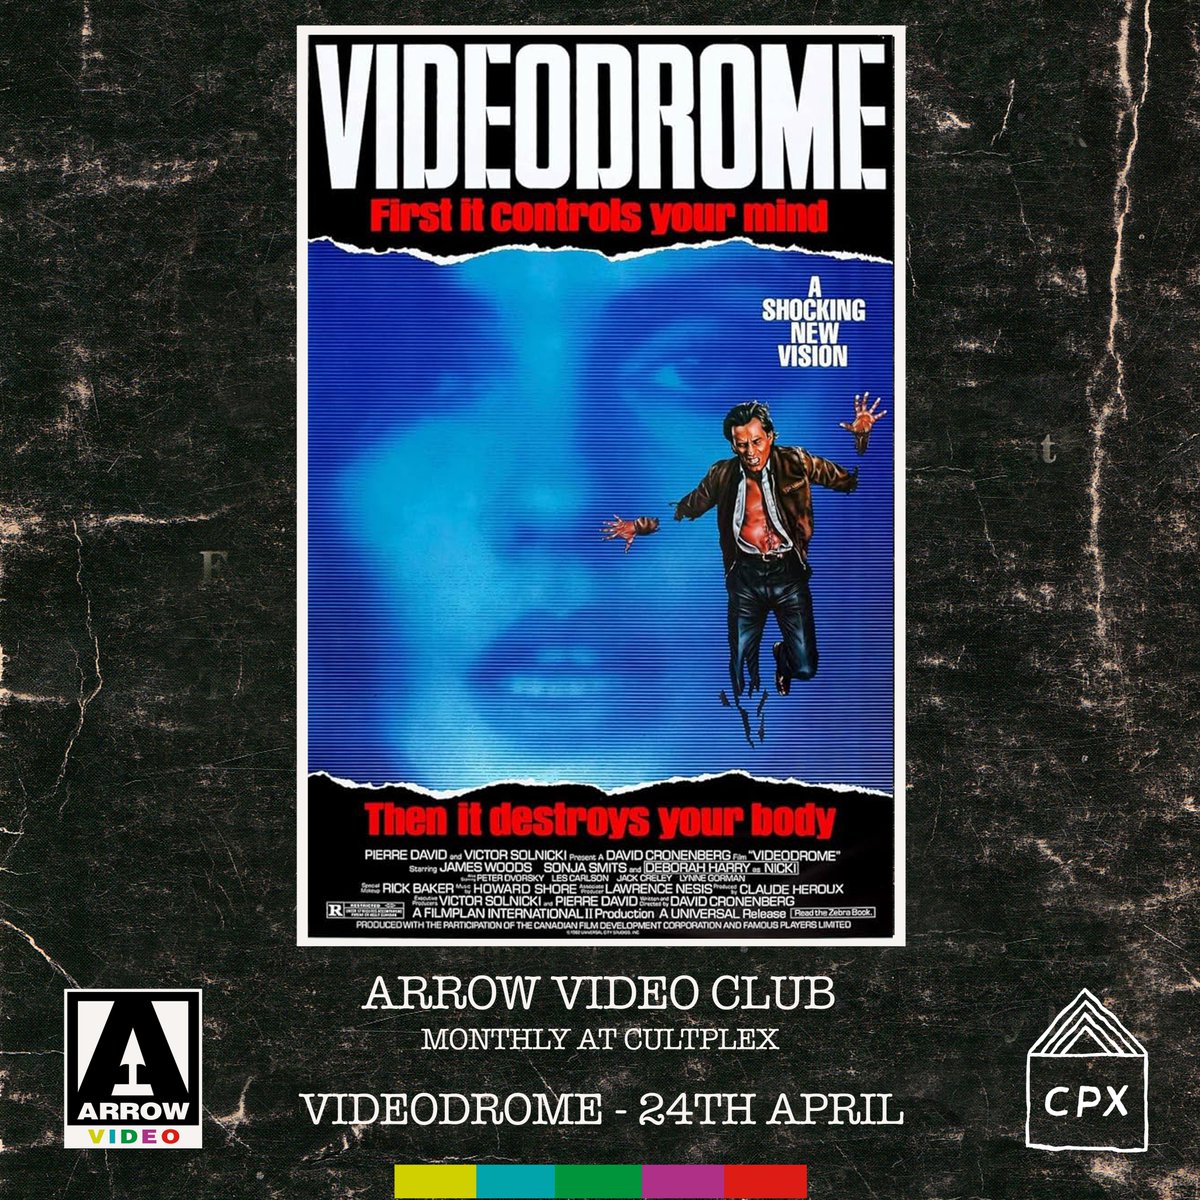 The inaugural ARROW VIDEO CLUB takes place on April 24th and we're kicking off with stone cold cult classic from David Cronenberg! This new event is a monthly collab with @ArrowFilmsVideo, celebrating some of their best physical releases! Book now: bit.ly/49d1WM8